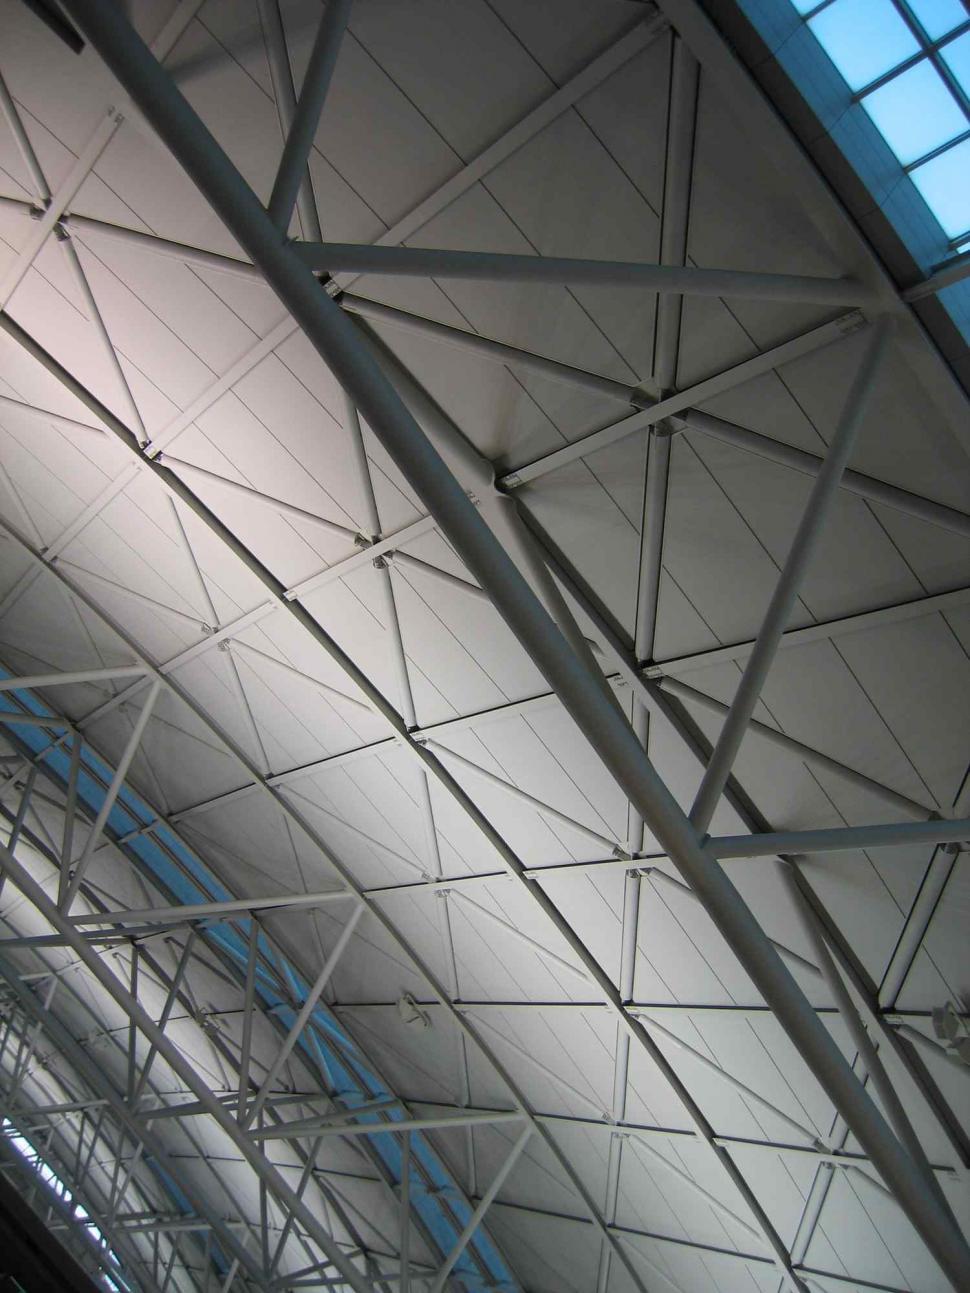 Free Image of The ceiling of airport 